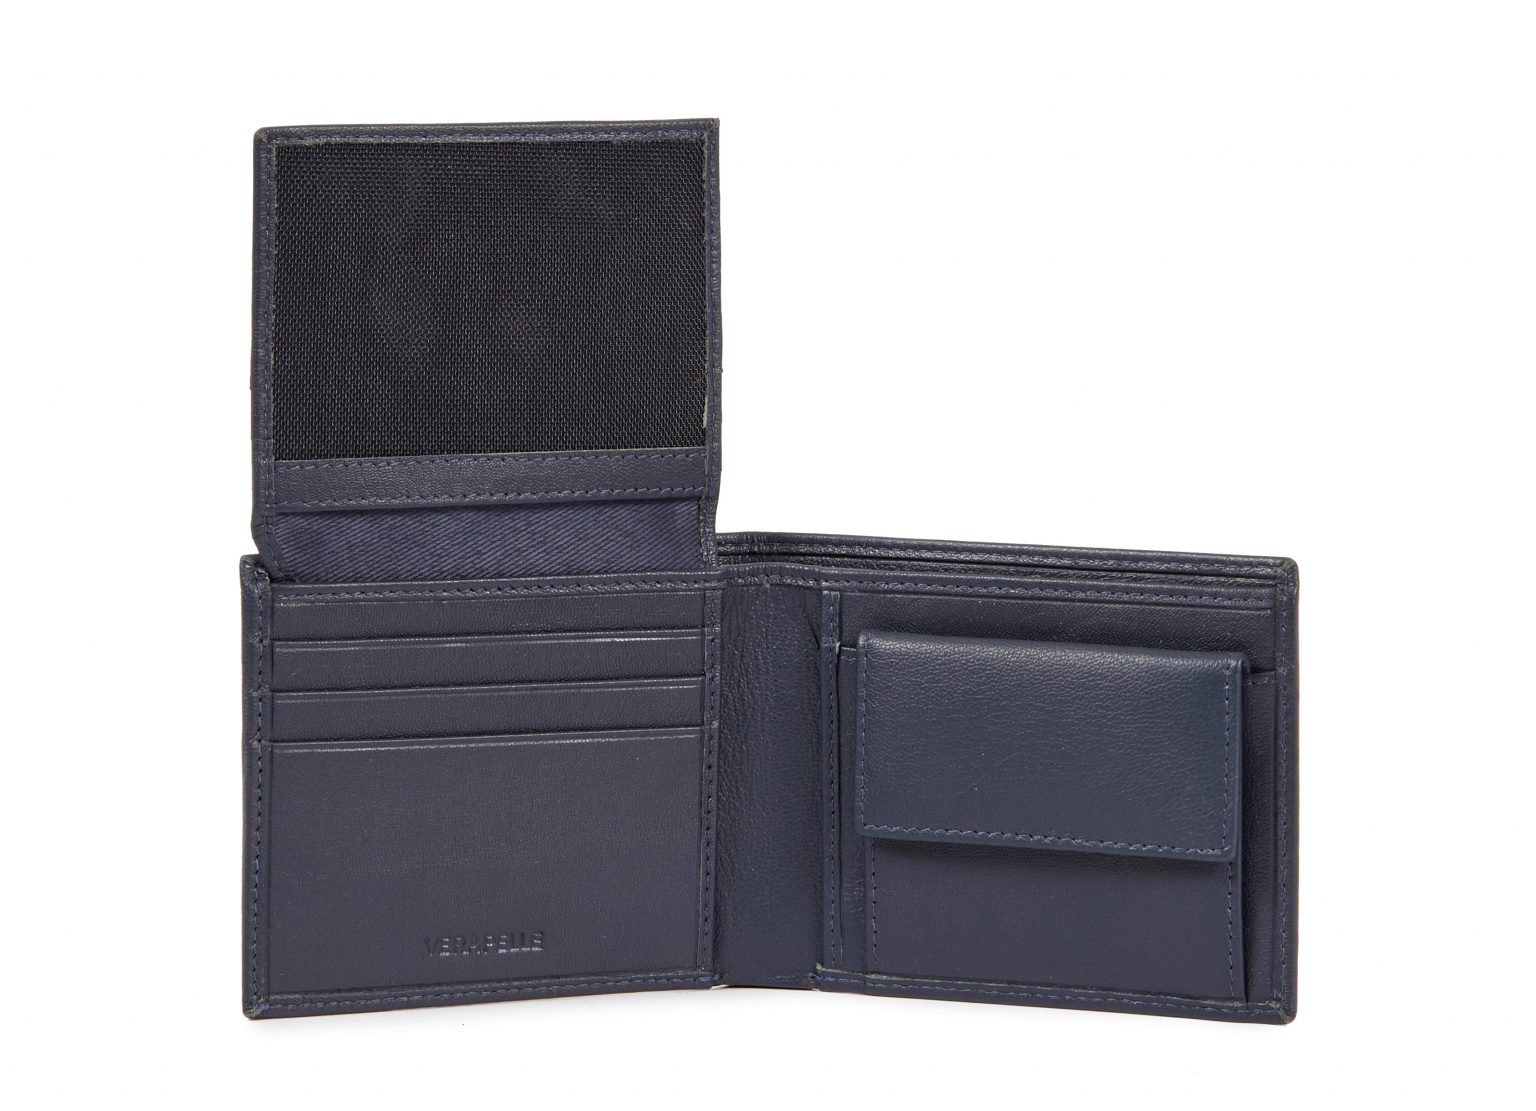 U.S. Polo Dorchester Horizontal Wallet with Flap - baglovers